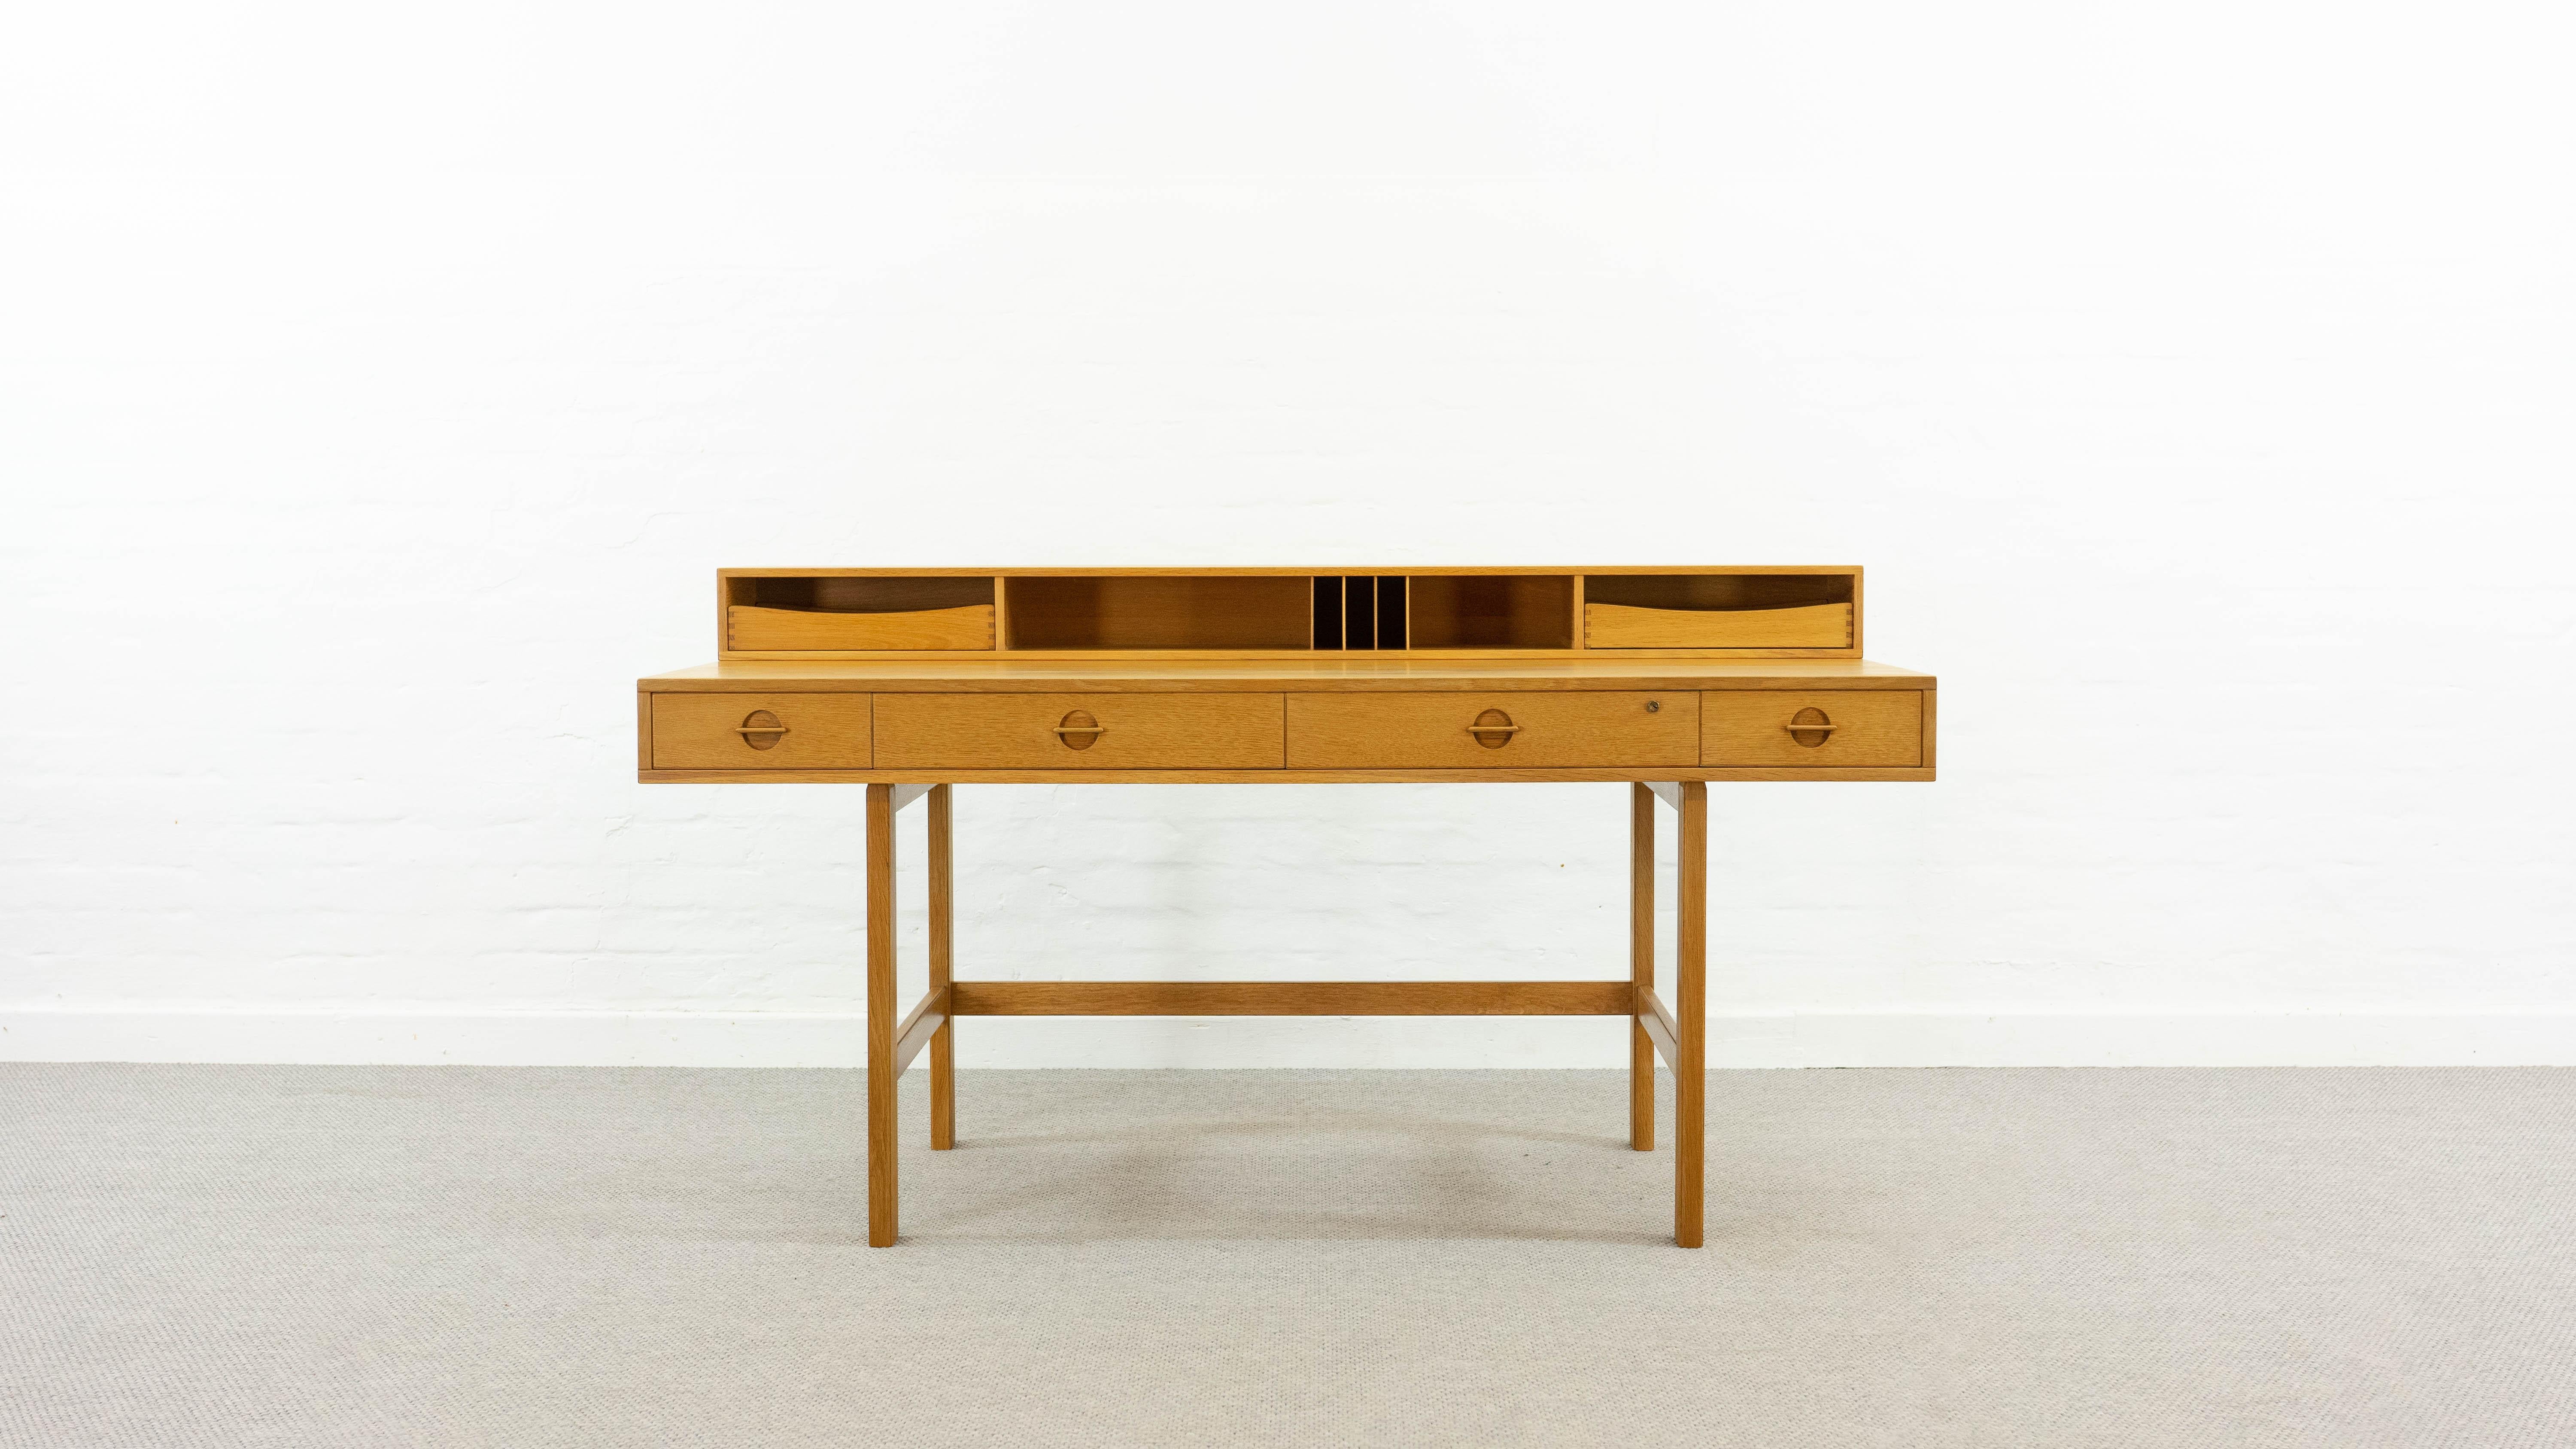 Flip-Top Desk by Jens Quistgaard for Peter Løvig Nielsen, Denmark. A top example of the mid century danish design movement. The top piece/shelf is hinged and the table can be converted in a larger working table-top for 2 people. The table is